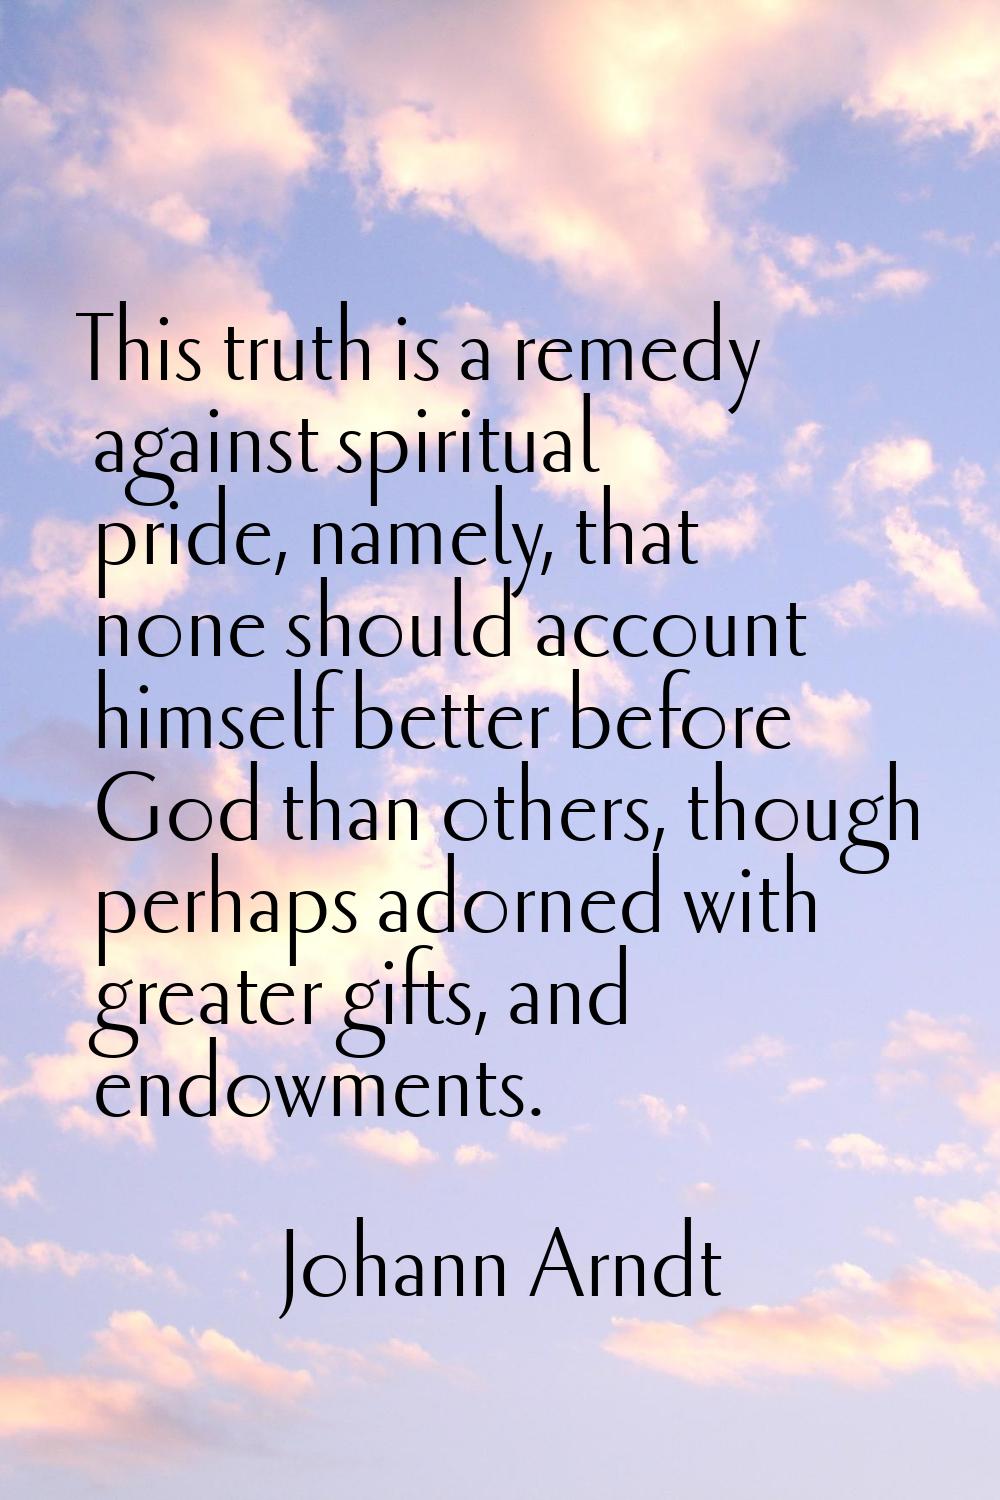 This truth is a remedy against spiritual pride, namely, that none should account himself better bef